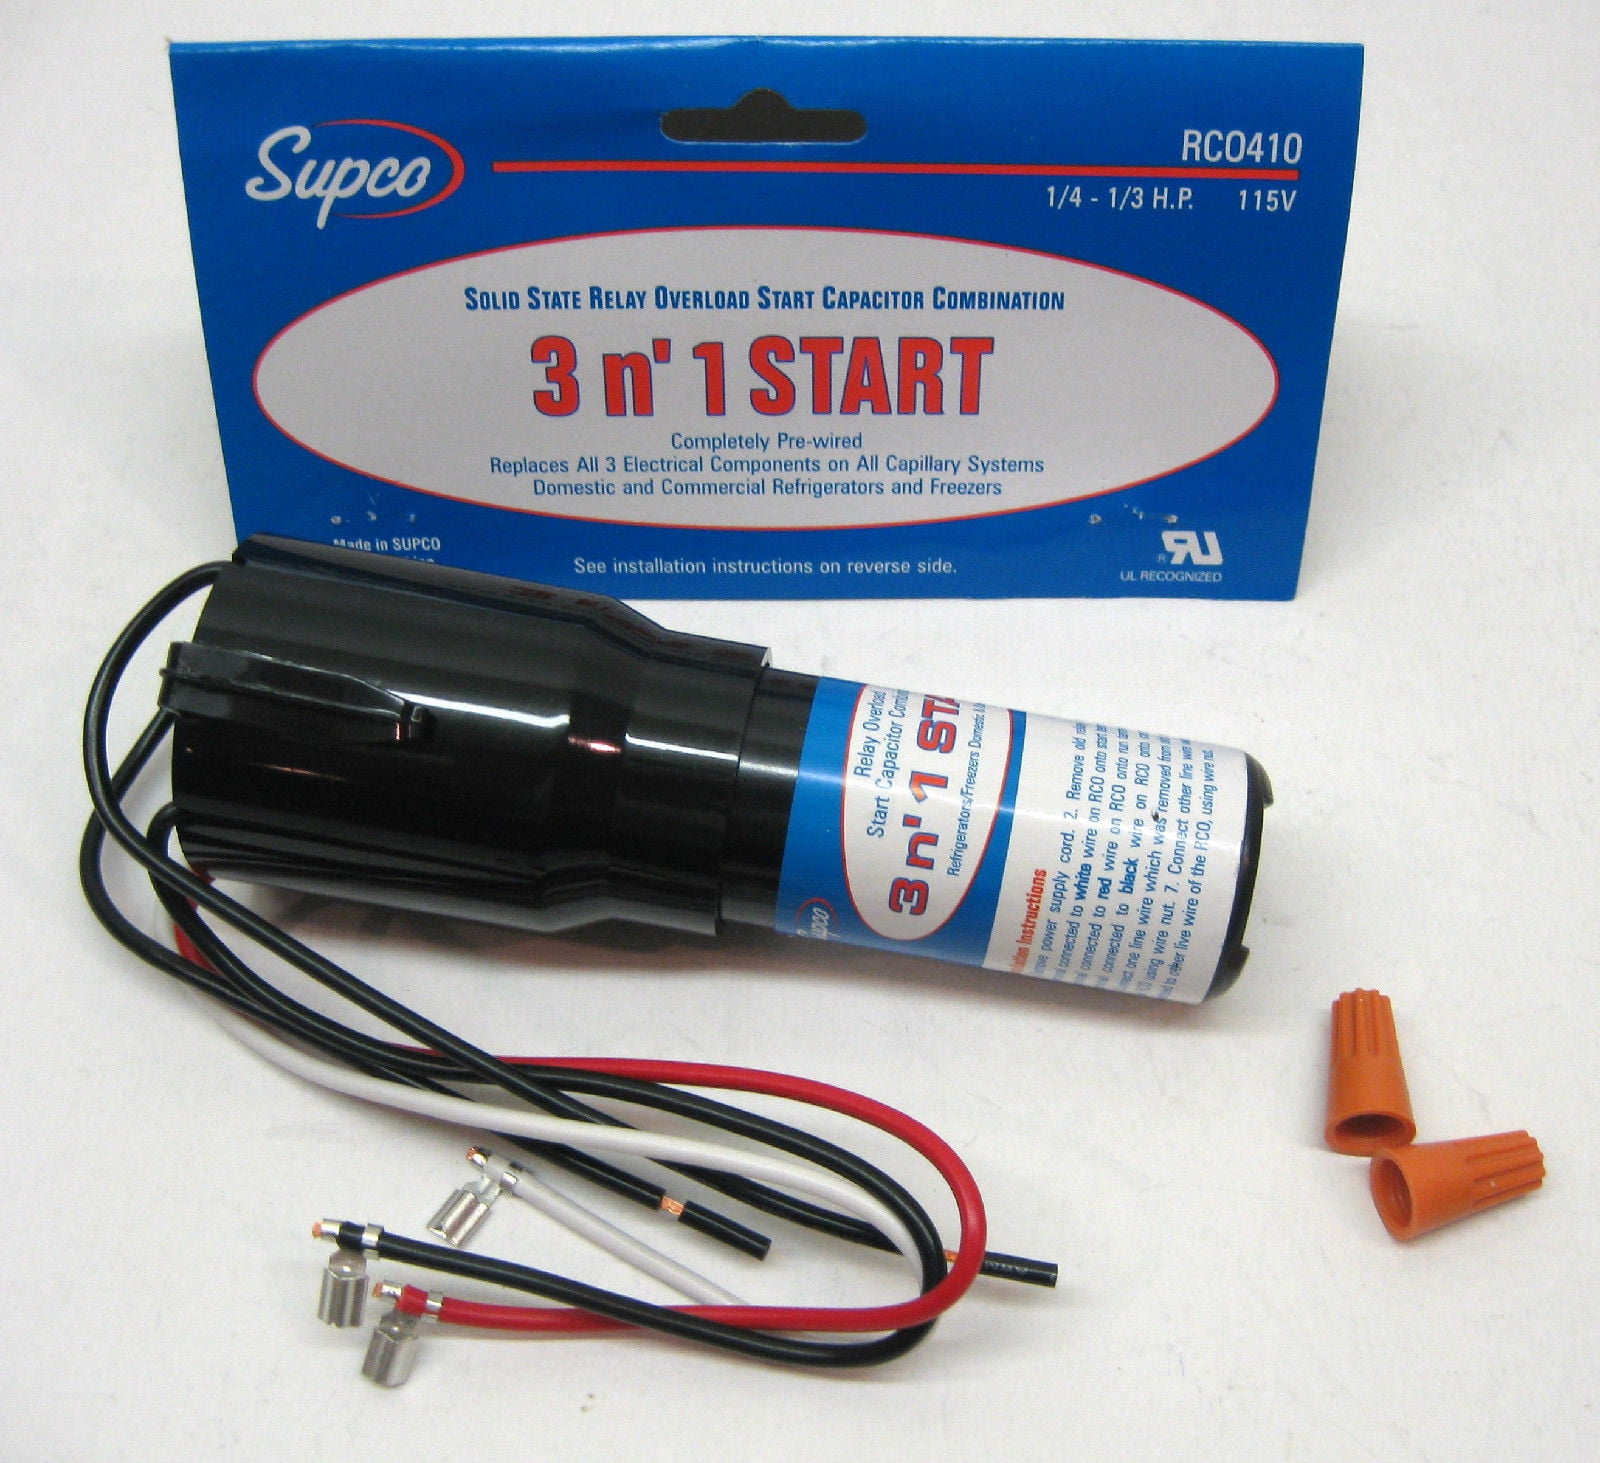 Zero HS41 Start Kit Replacement RCO410 3 in 1 Compressor Hard Start Capacitor Kit For Refrigerators & Freezers 1/4-1/3 H.P 110 to 125 VAC